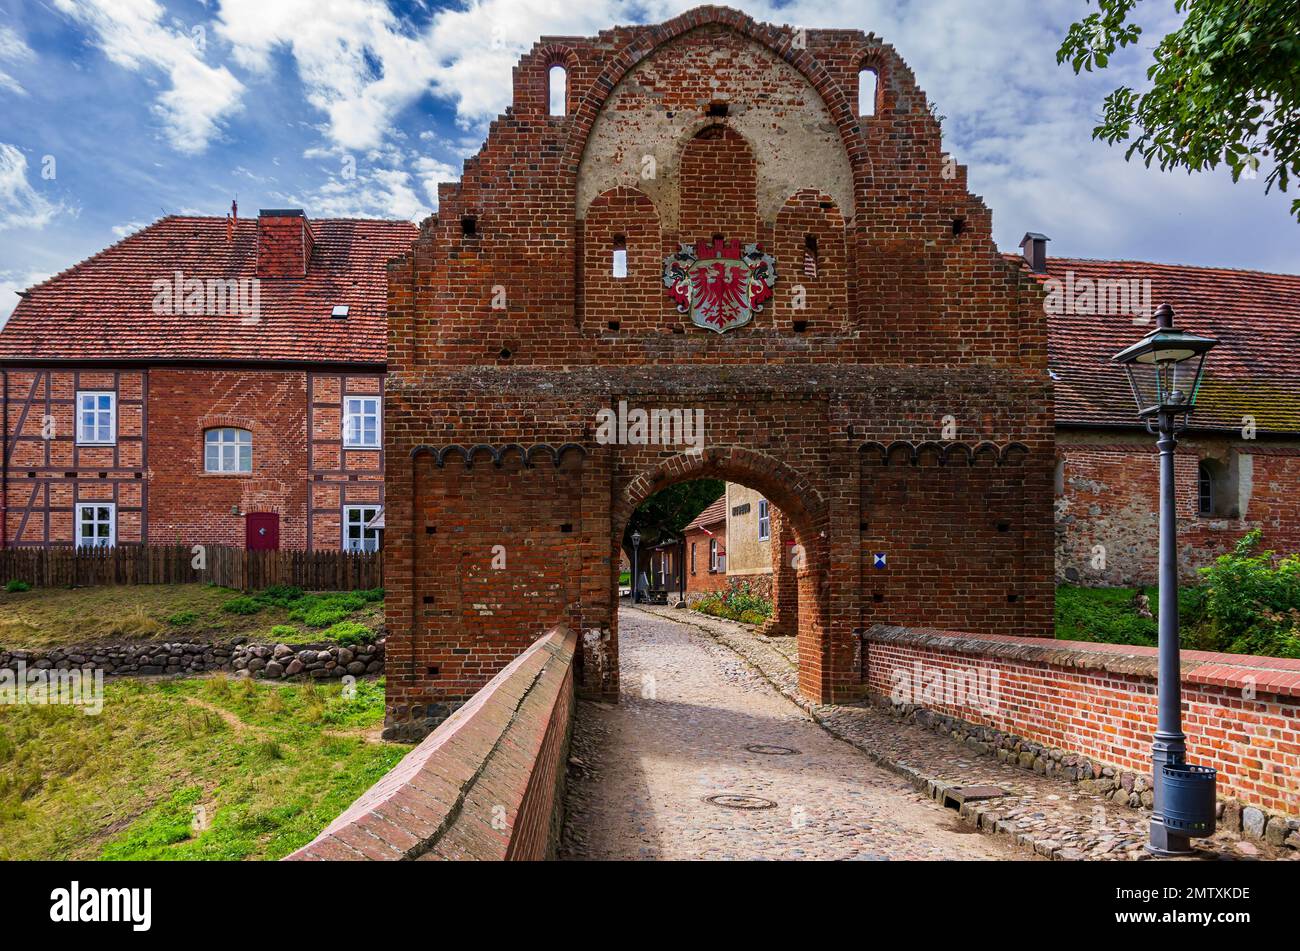 Main entrance and gatehouse of Stargard Castle, a 12th century medieval hilltop castle, in Burg Stargard, Mecklenburg-Western Pomerania, Germany. Stock Photo